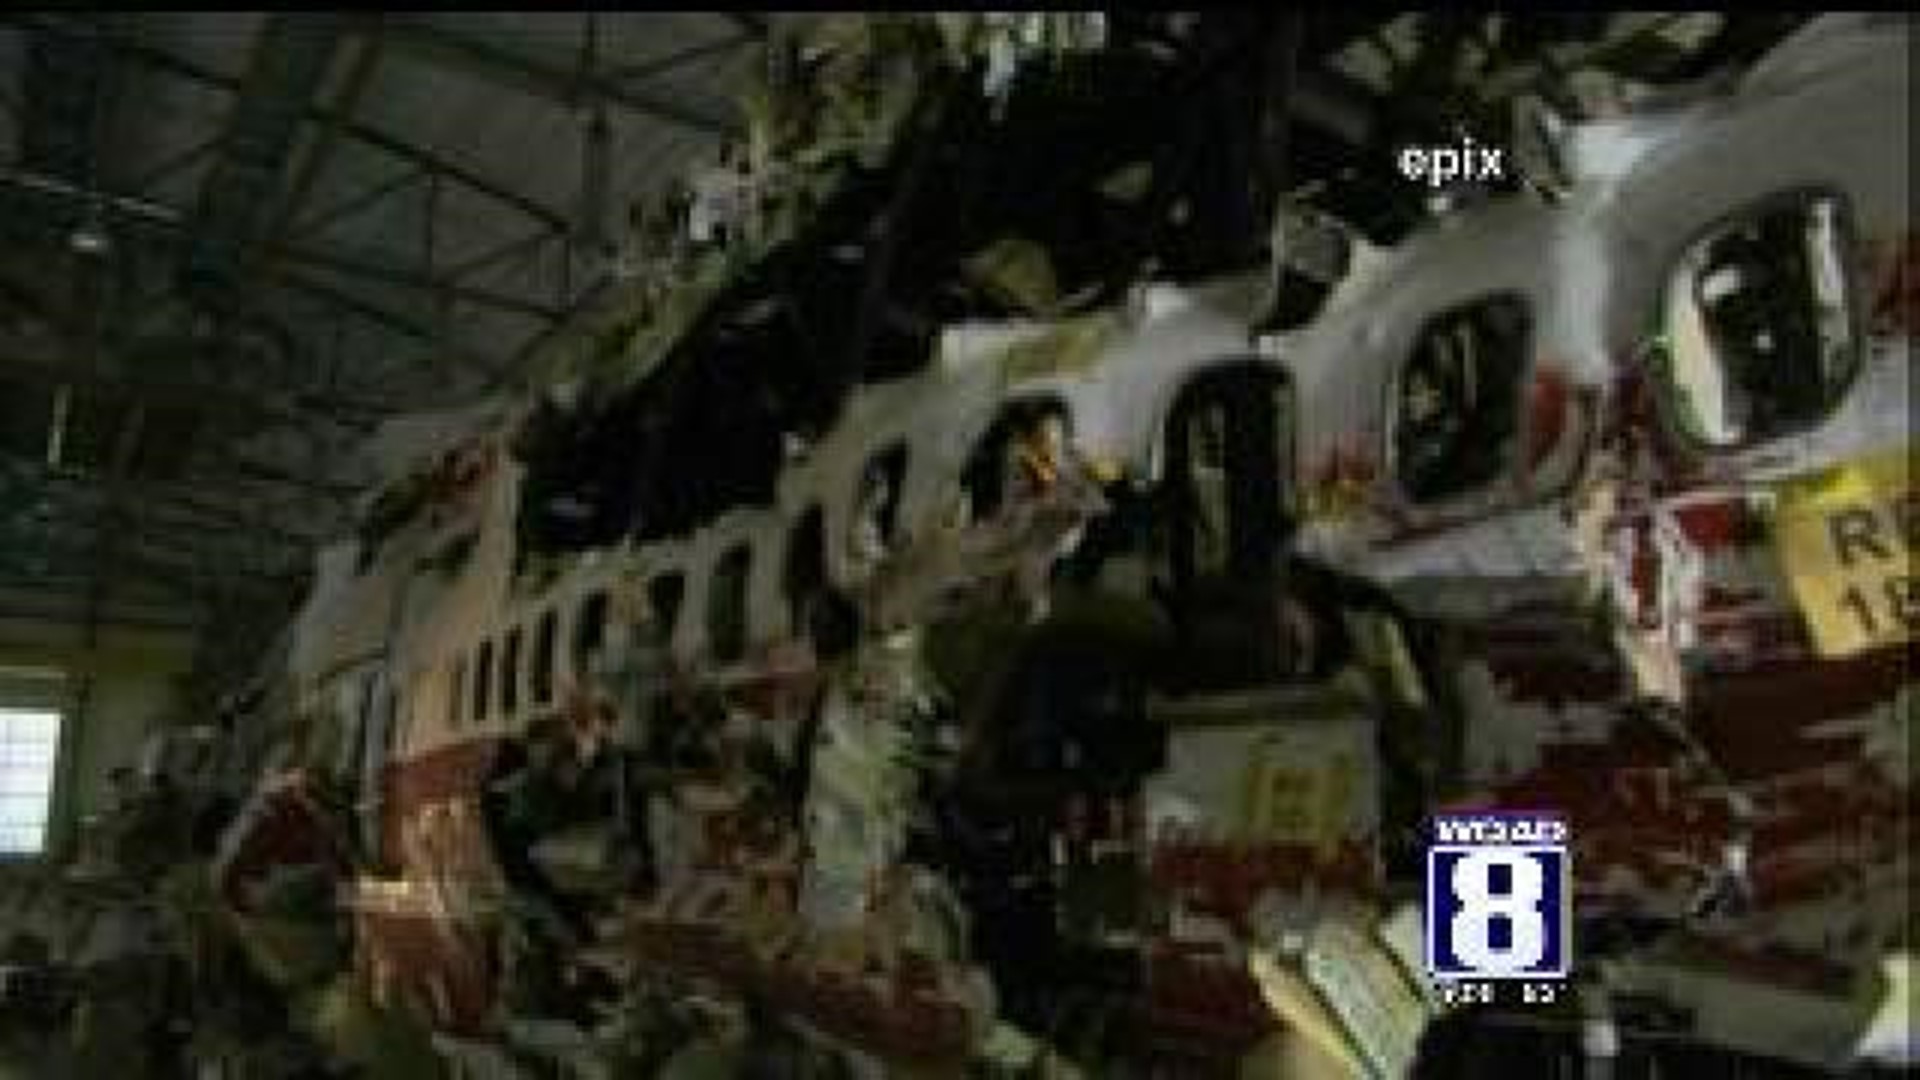 NTSB's TWA Flight 800 Reconstruction to be Decommissioned